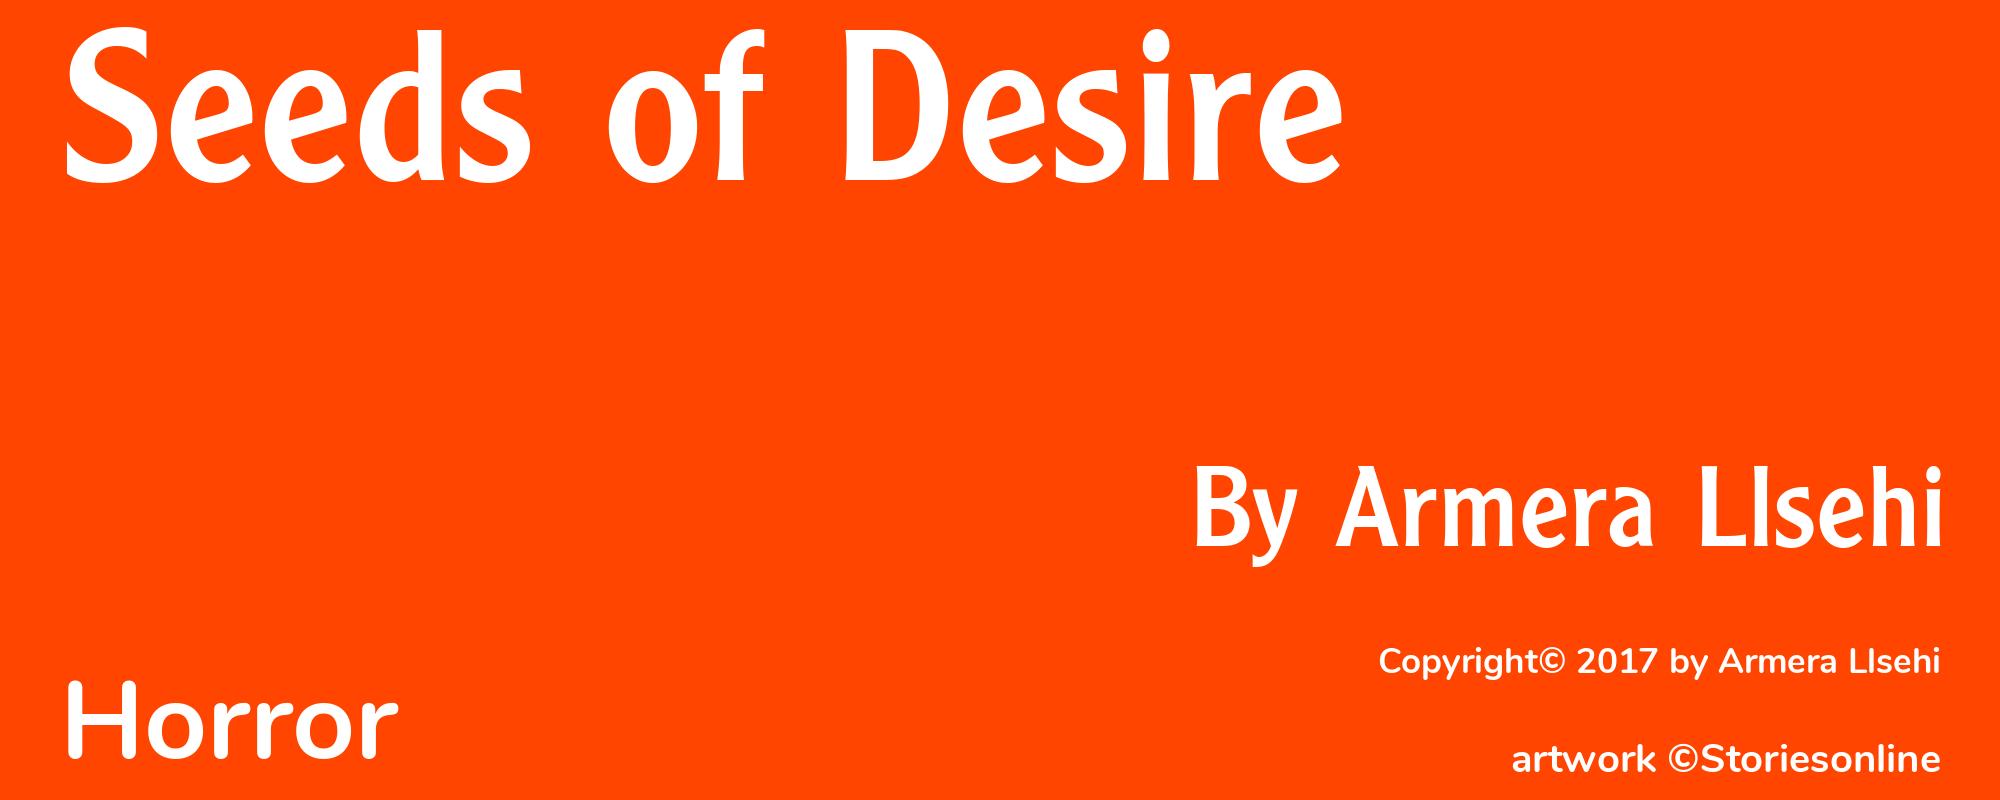 Seeds of Desire - Cover